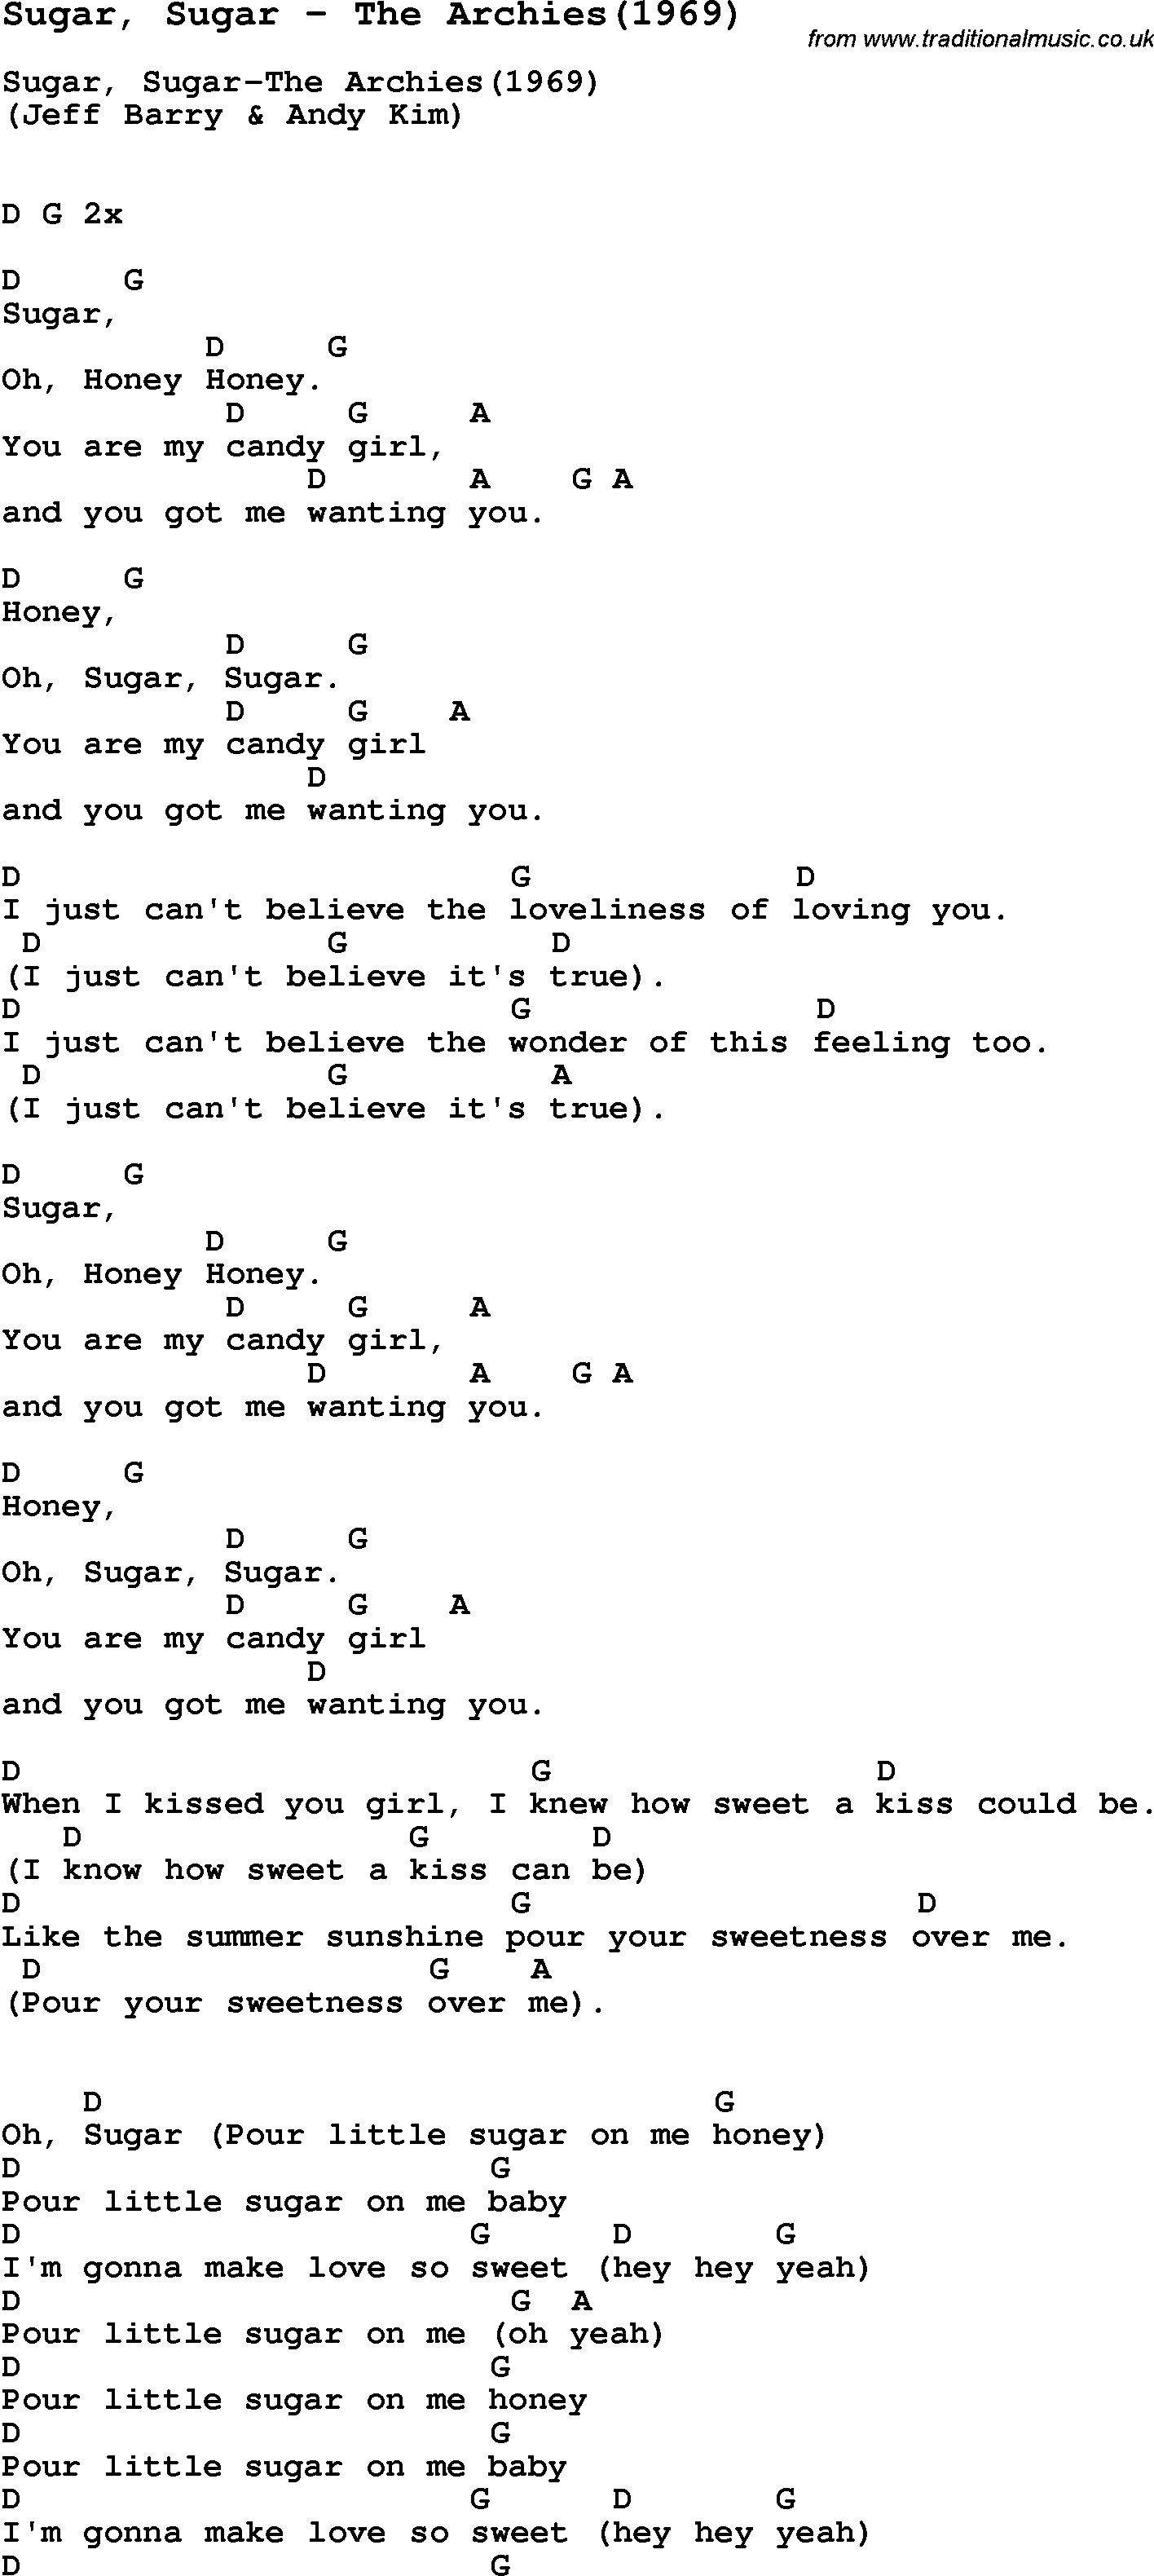 Song Sugar, Sugar by The Archies(1969), with lyrics for vocal performance and accompaniment chords for Ukulele, Guitar Banjo etc.